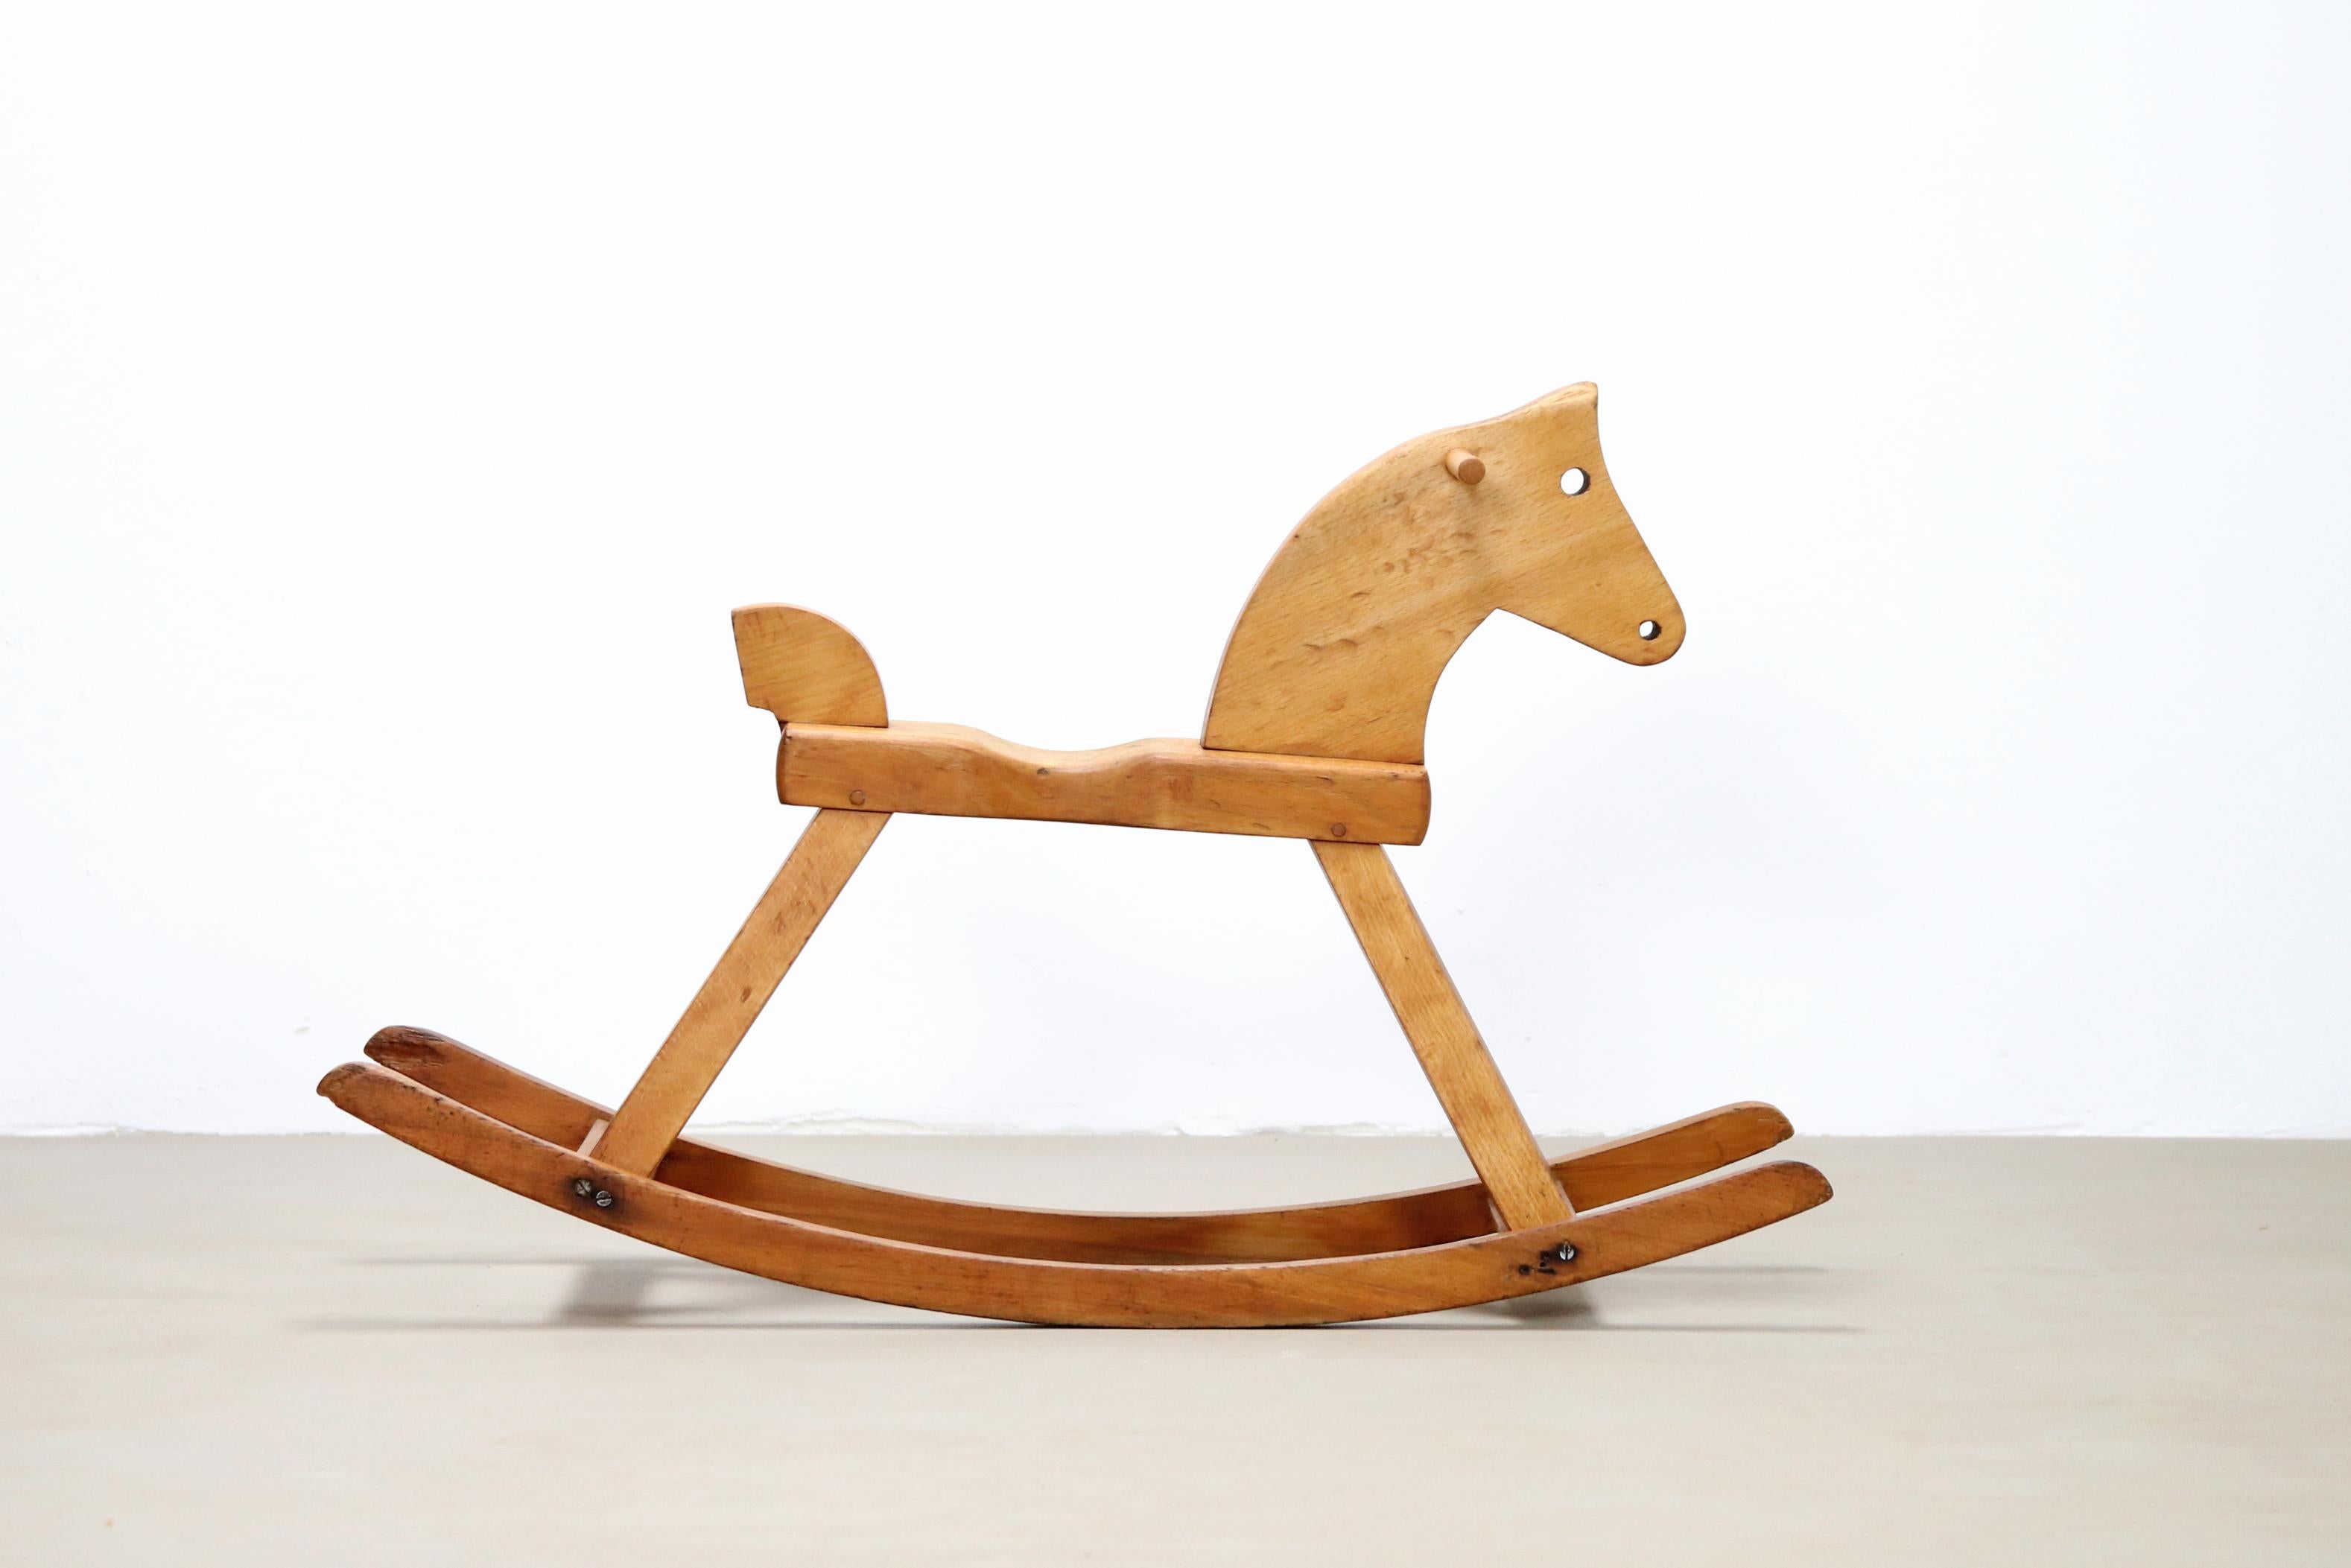 Officially children's toys, but actually an art object in itself. 
This very beautiful Kay Bojesen rocking horse is made of solid beech wood and marked by the manufacturer on its belly.
The horse was designed from 1936 and is design that exactly